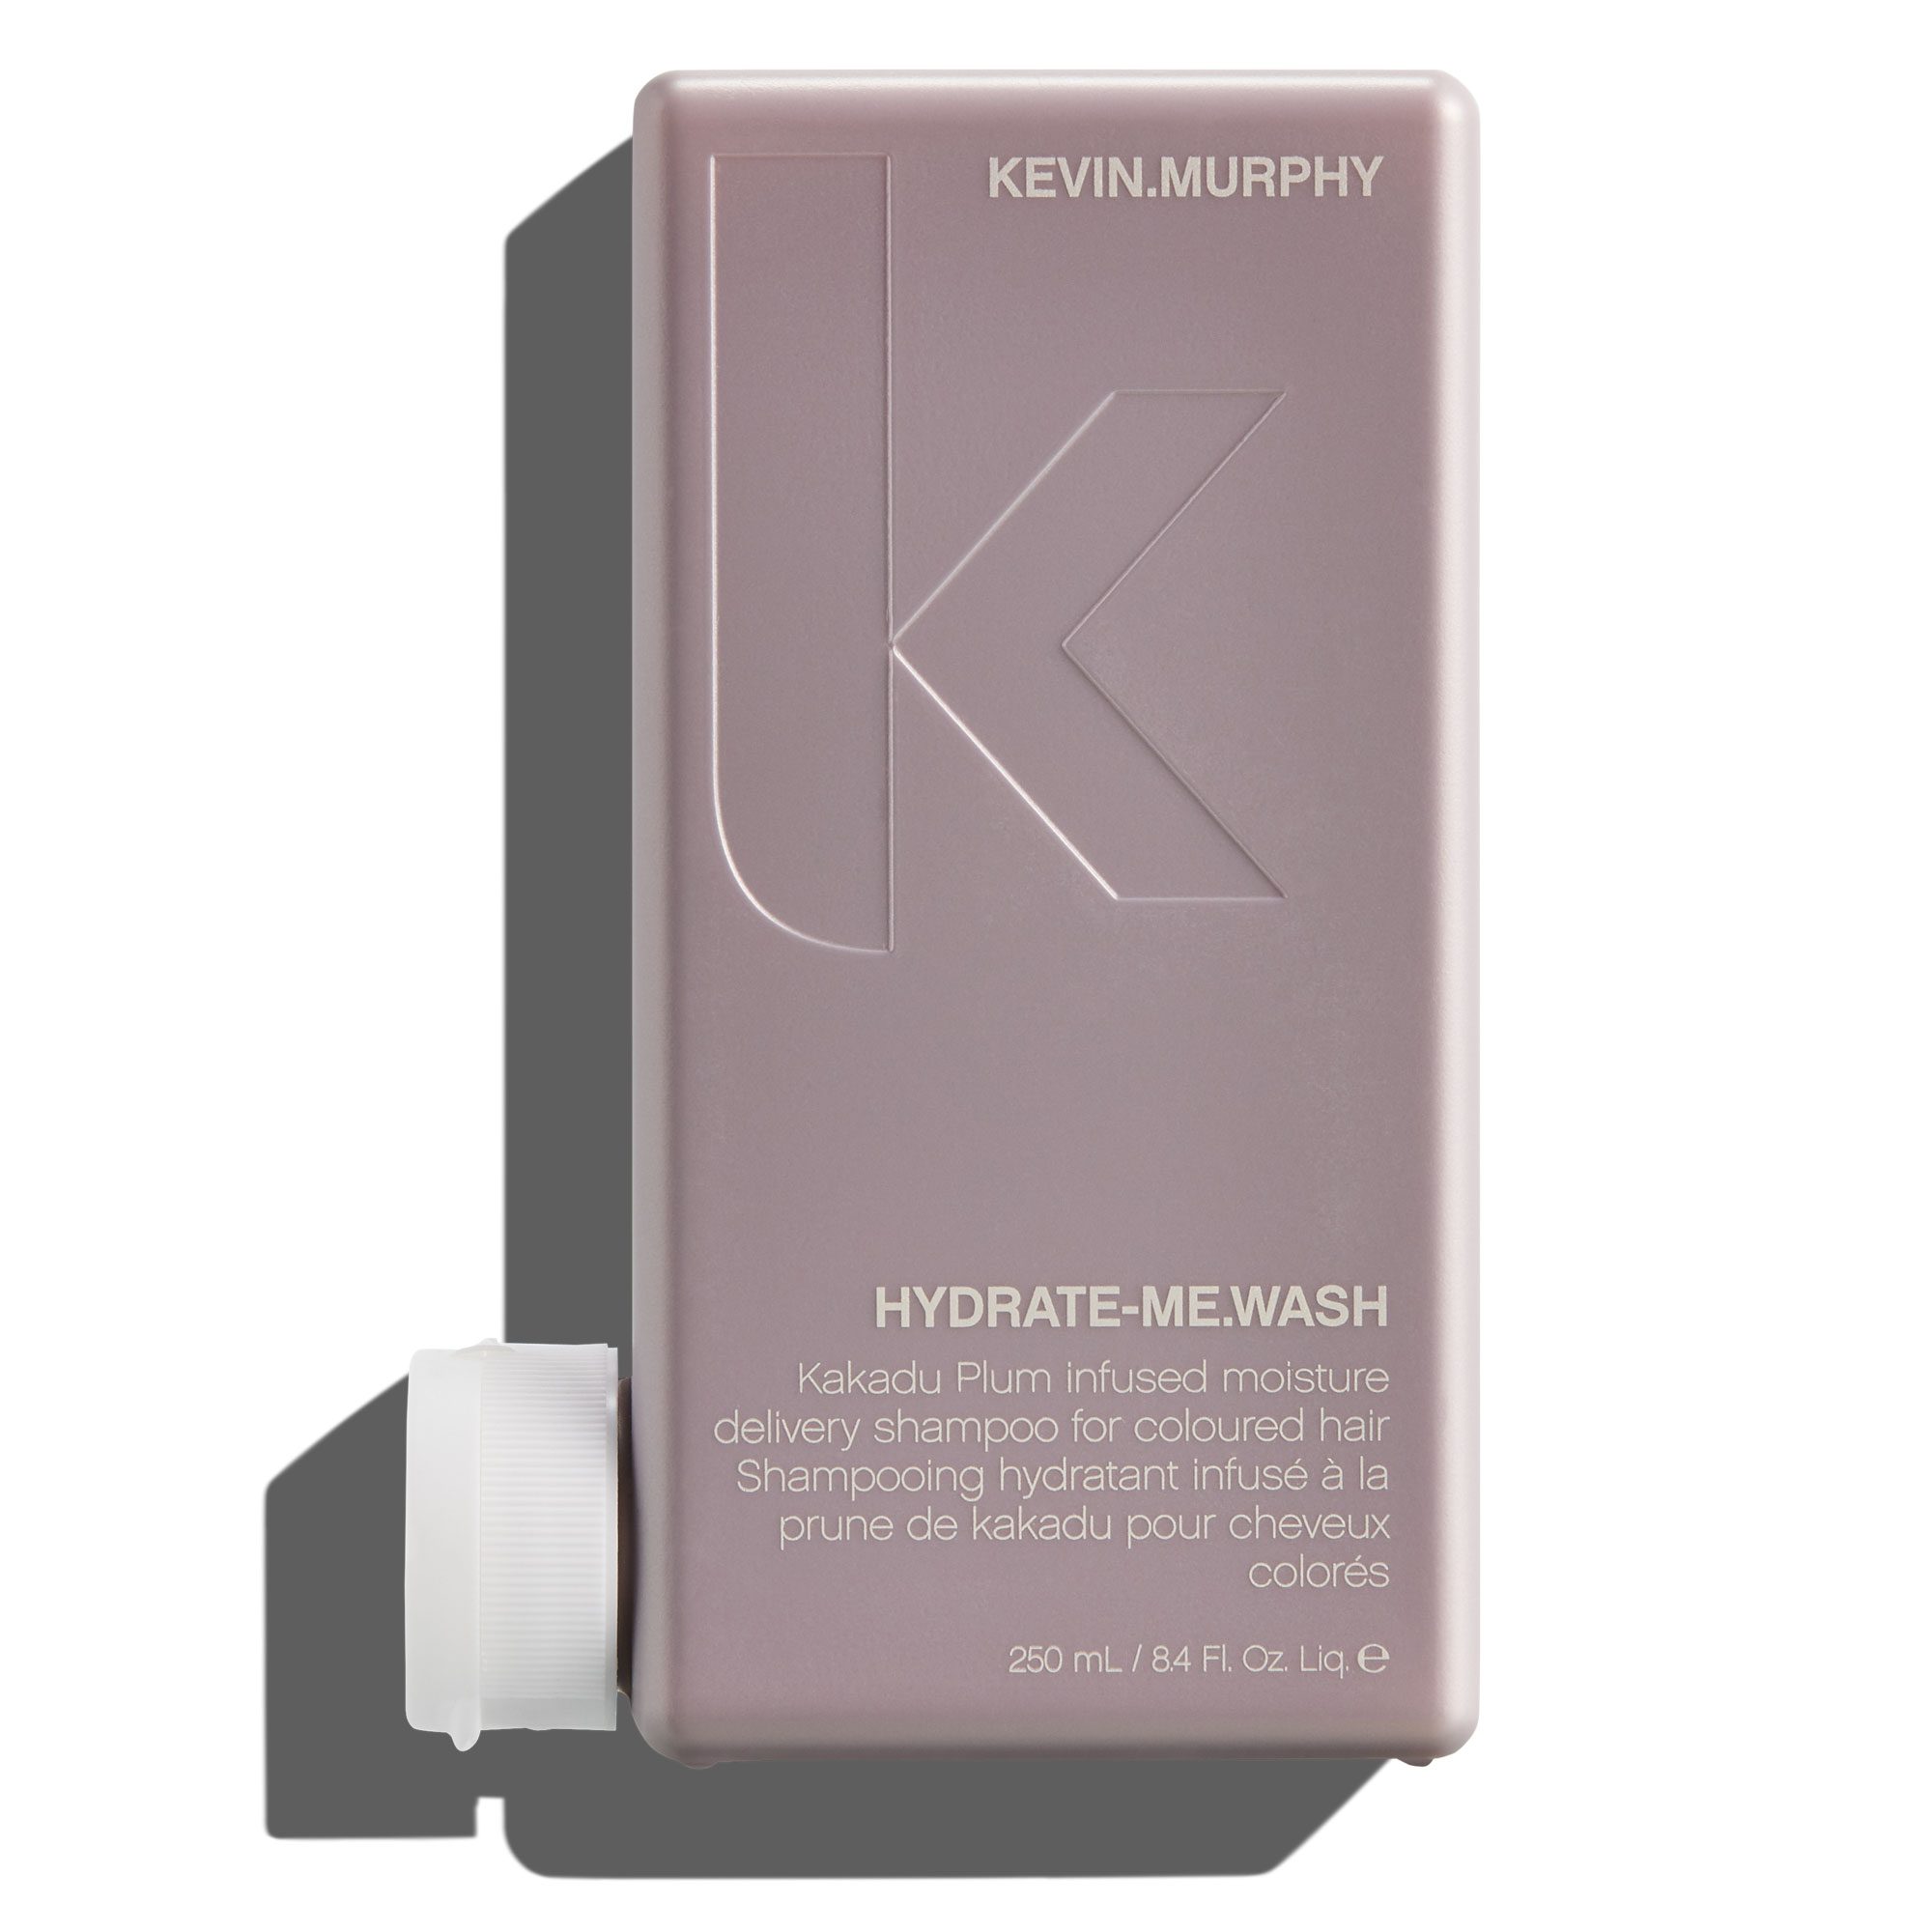 KEVIN.MURPHY HYDRATE-ME.WASH 8.4oz